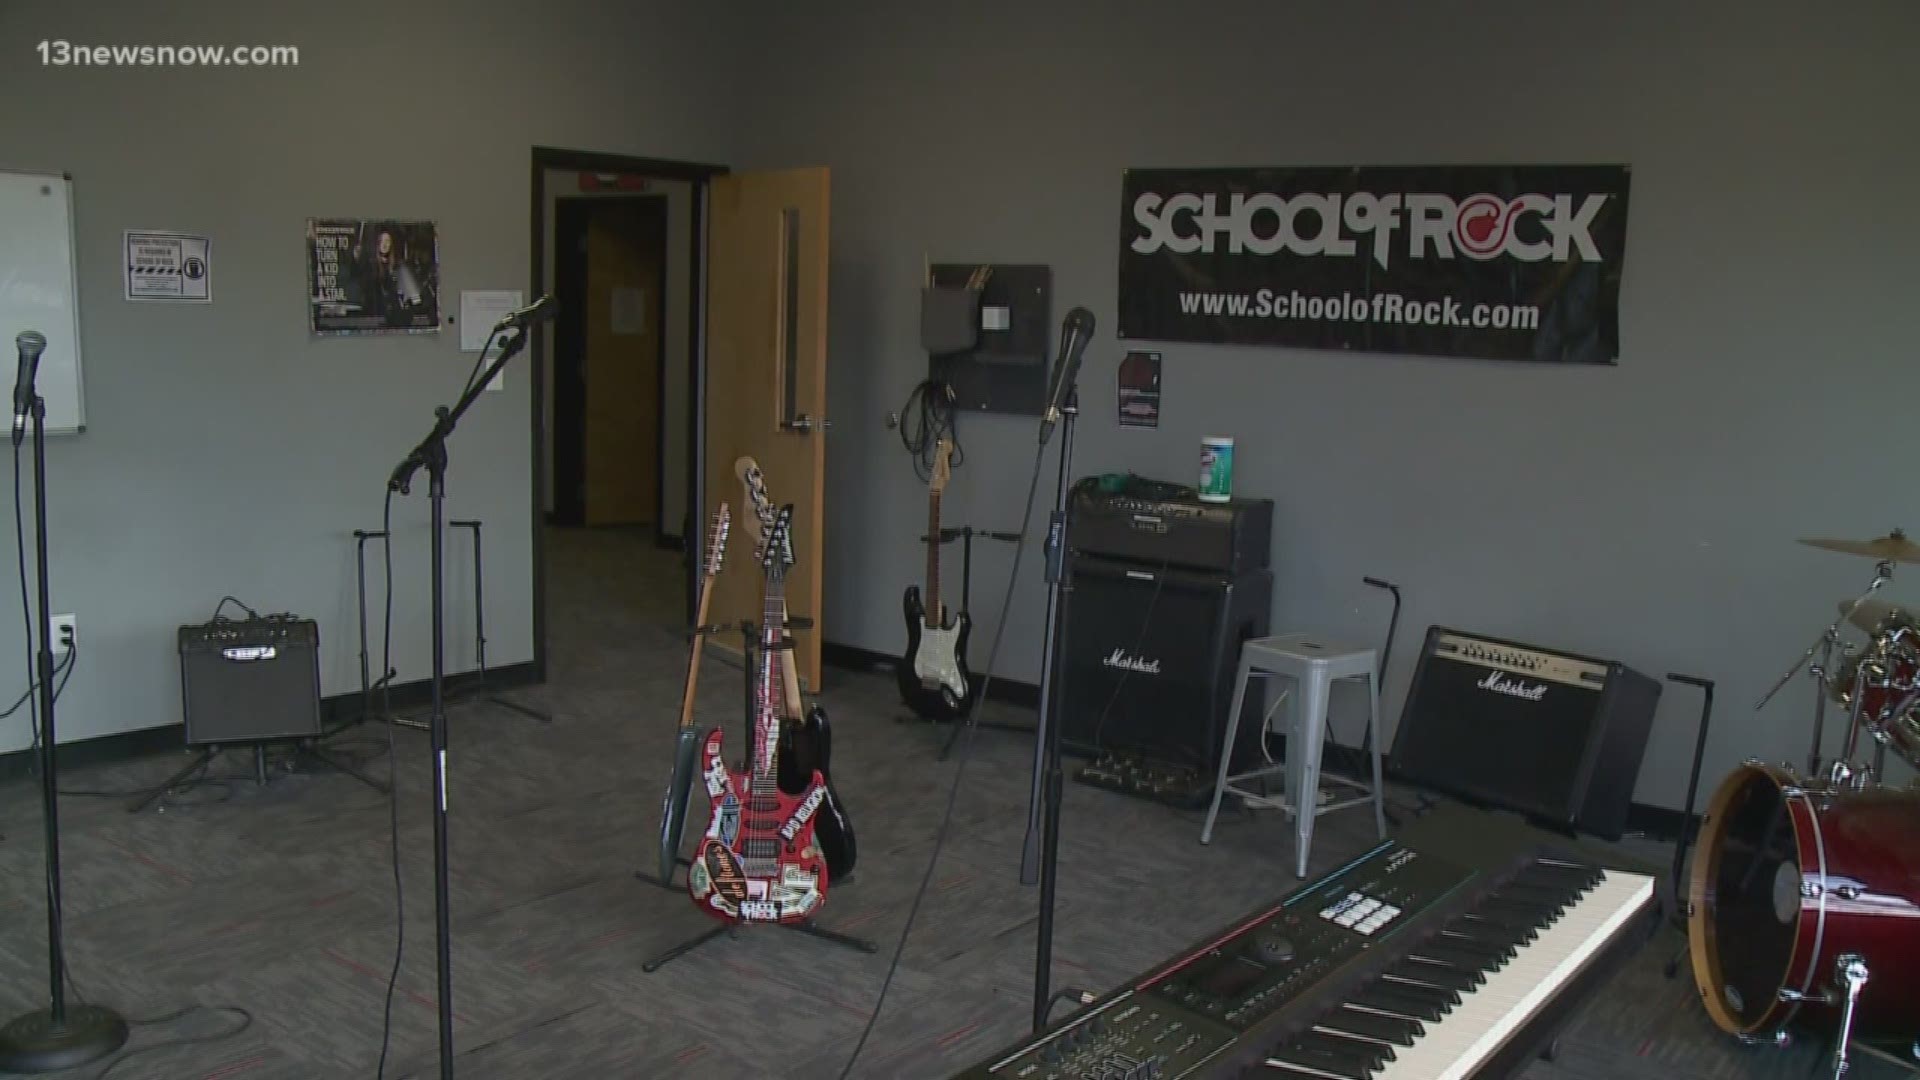 School of Rock Remote is allowing students to continue music lessons remotely while still observing safe social distancing.